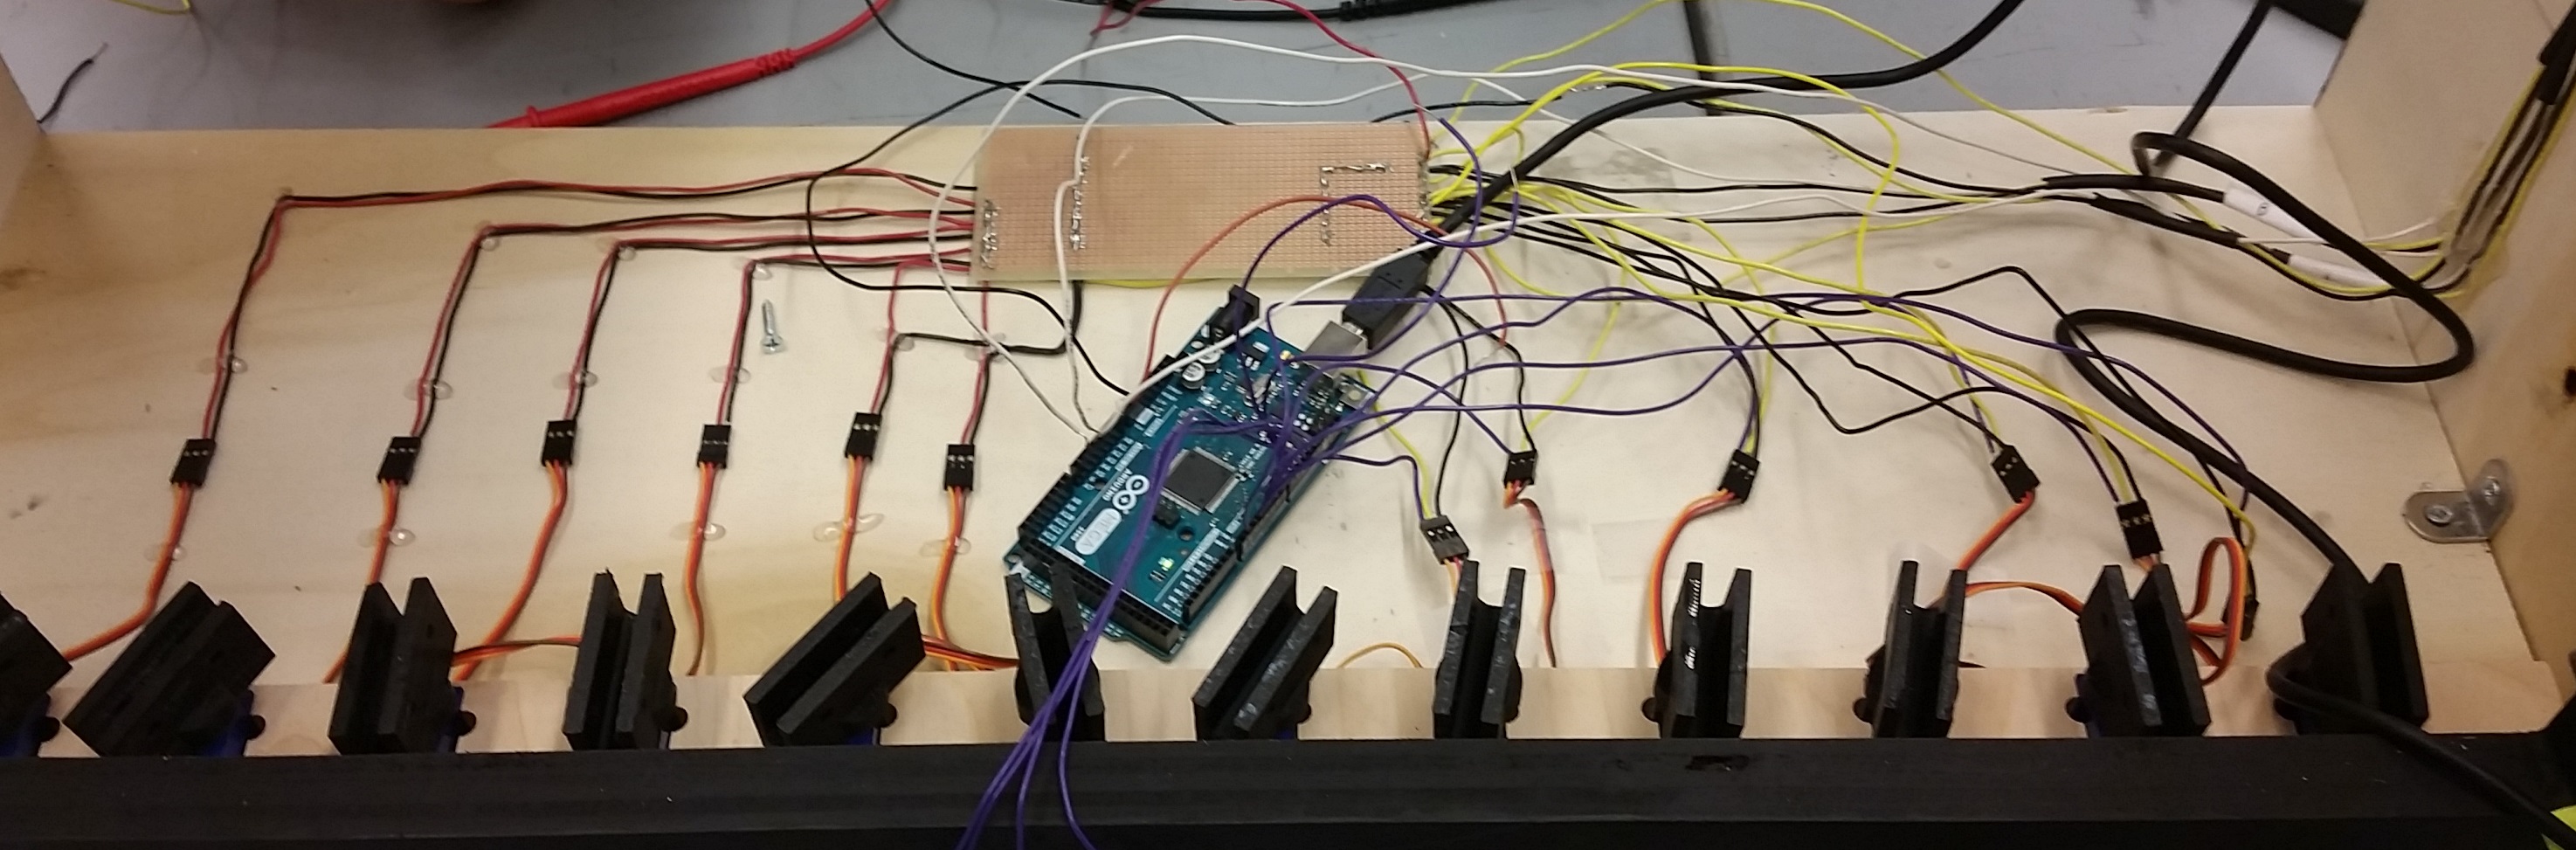 A close up view of the wires involved in our project from the servos and sensors to the protoboard and Arduino